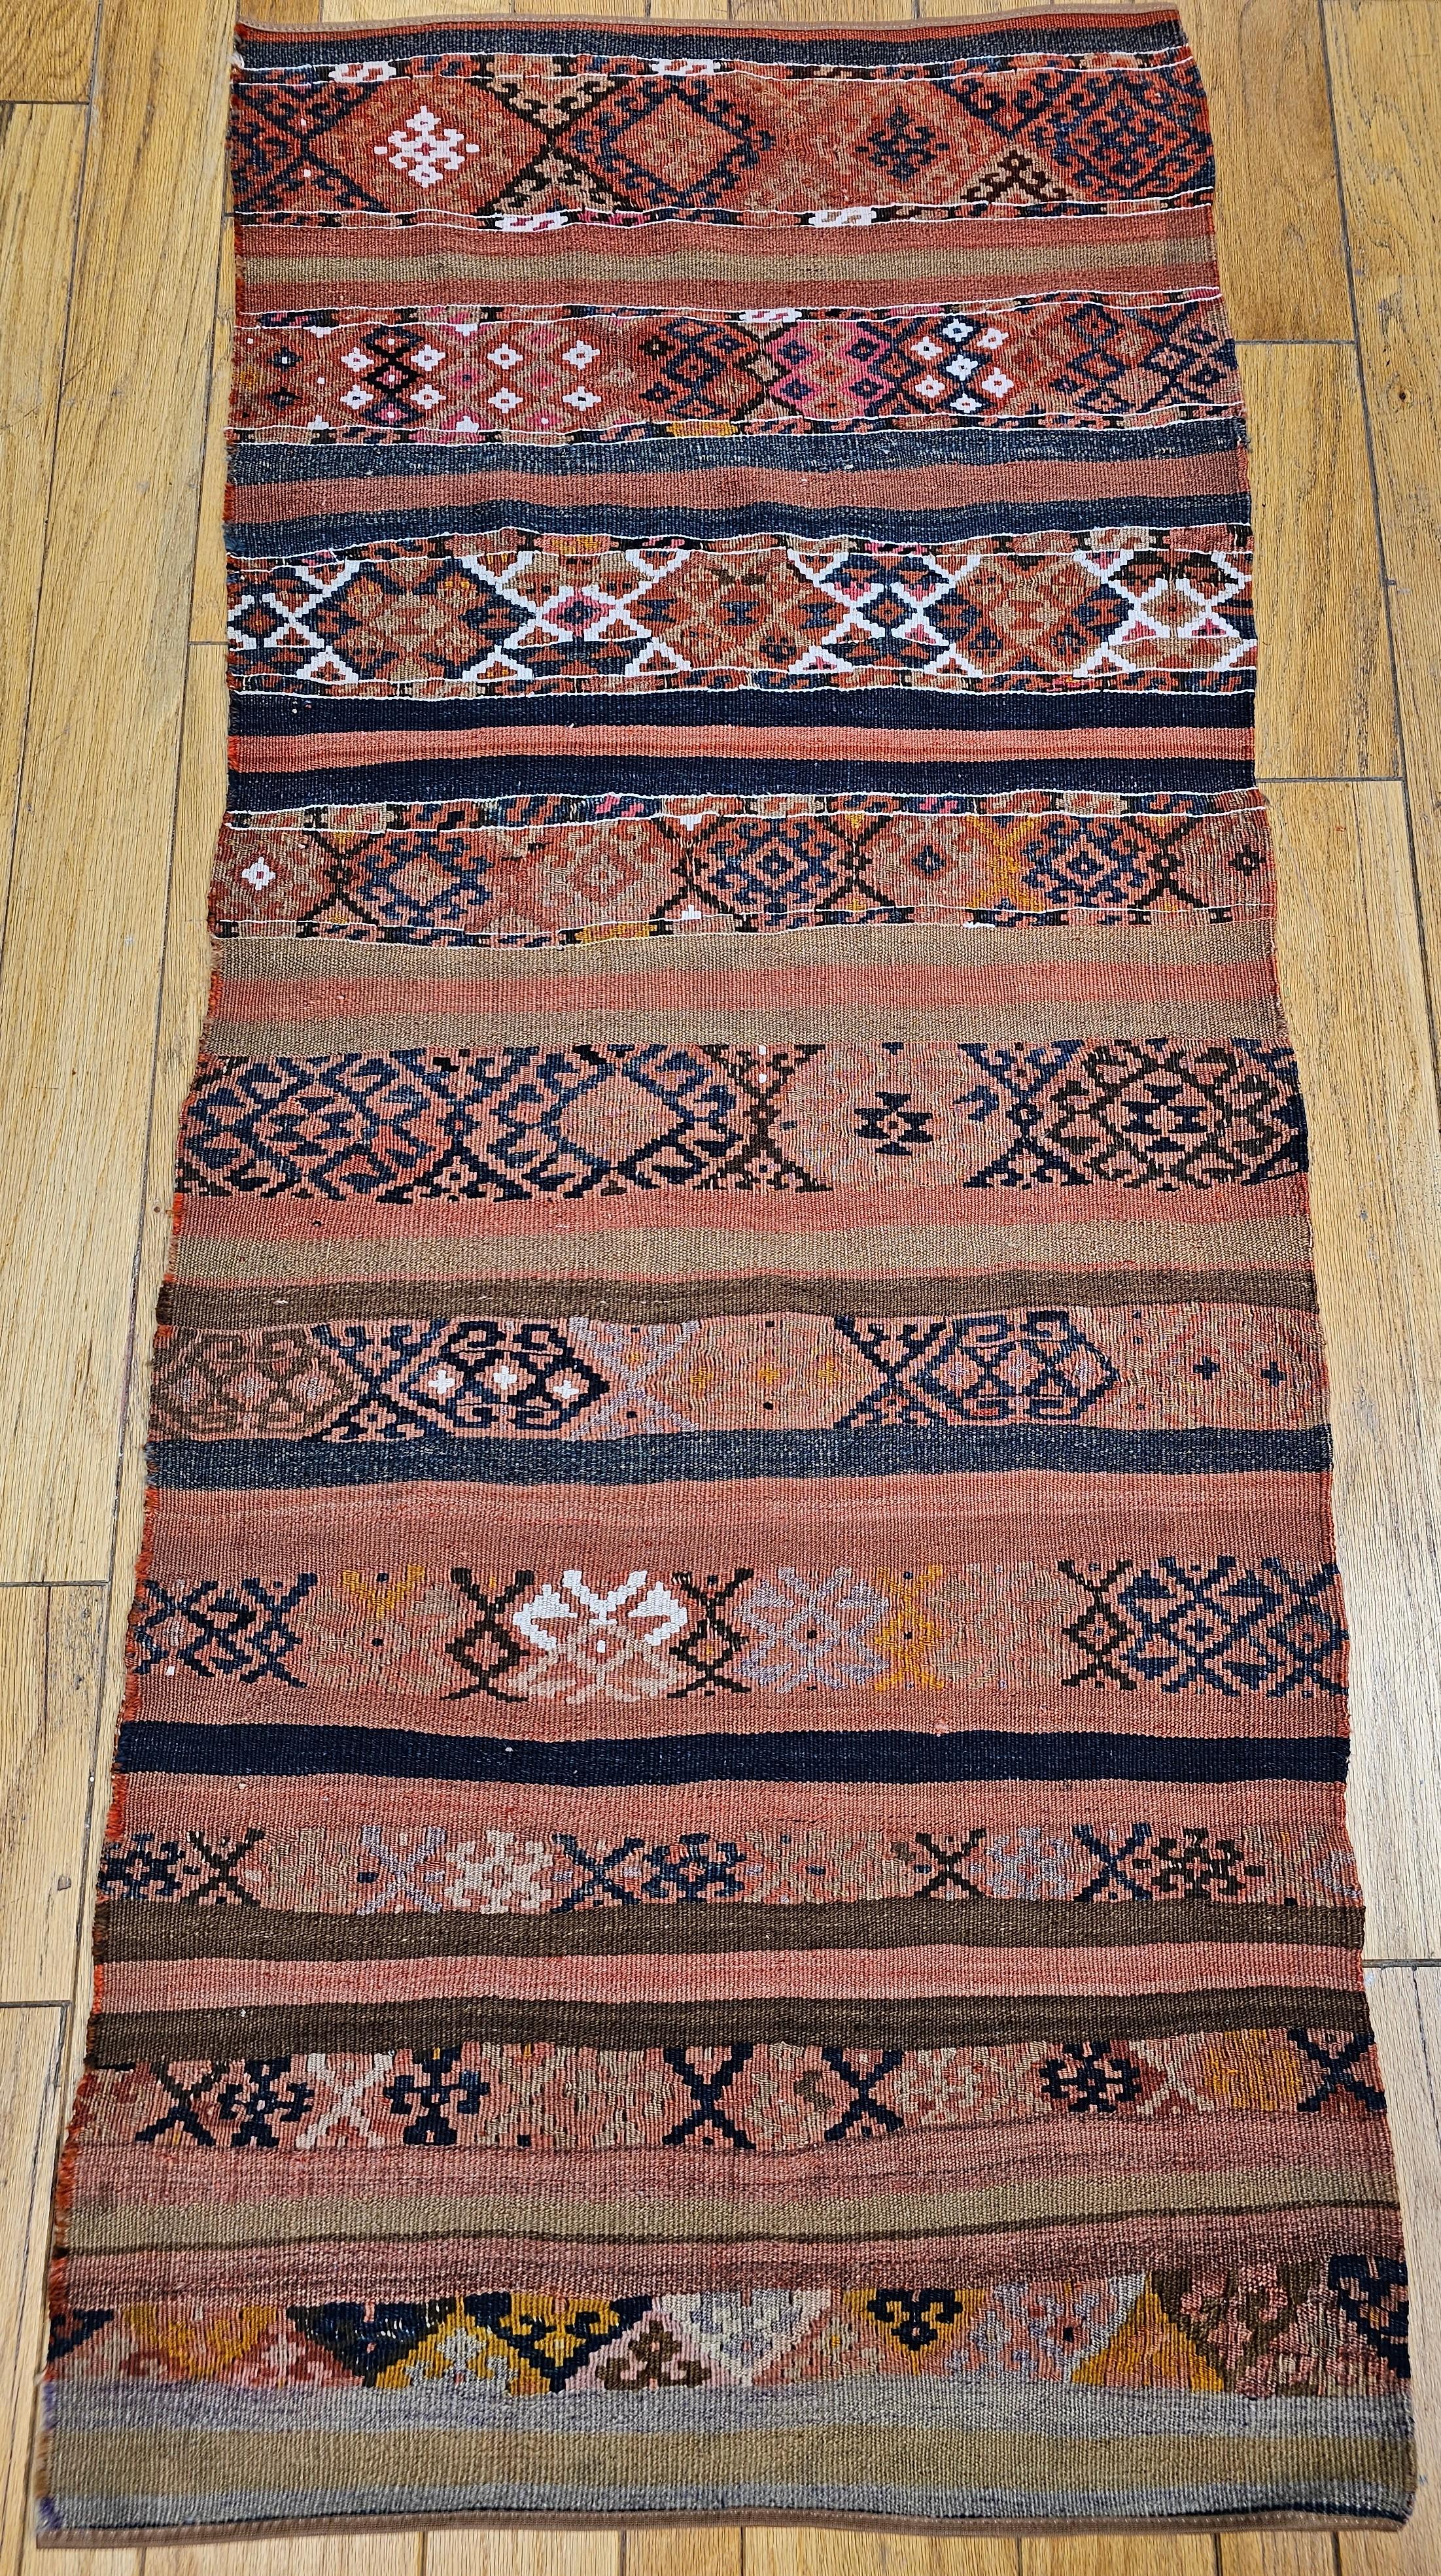 Vintage Caucasian Kilim in an all over stripe design from the early 20th century.  The kilim has traditional hooked star patterns in indigo blue set on a brick red and khaki field.  The designed stripes are  separated by solid bands in dark and